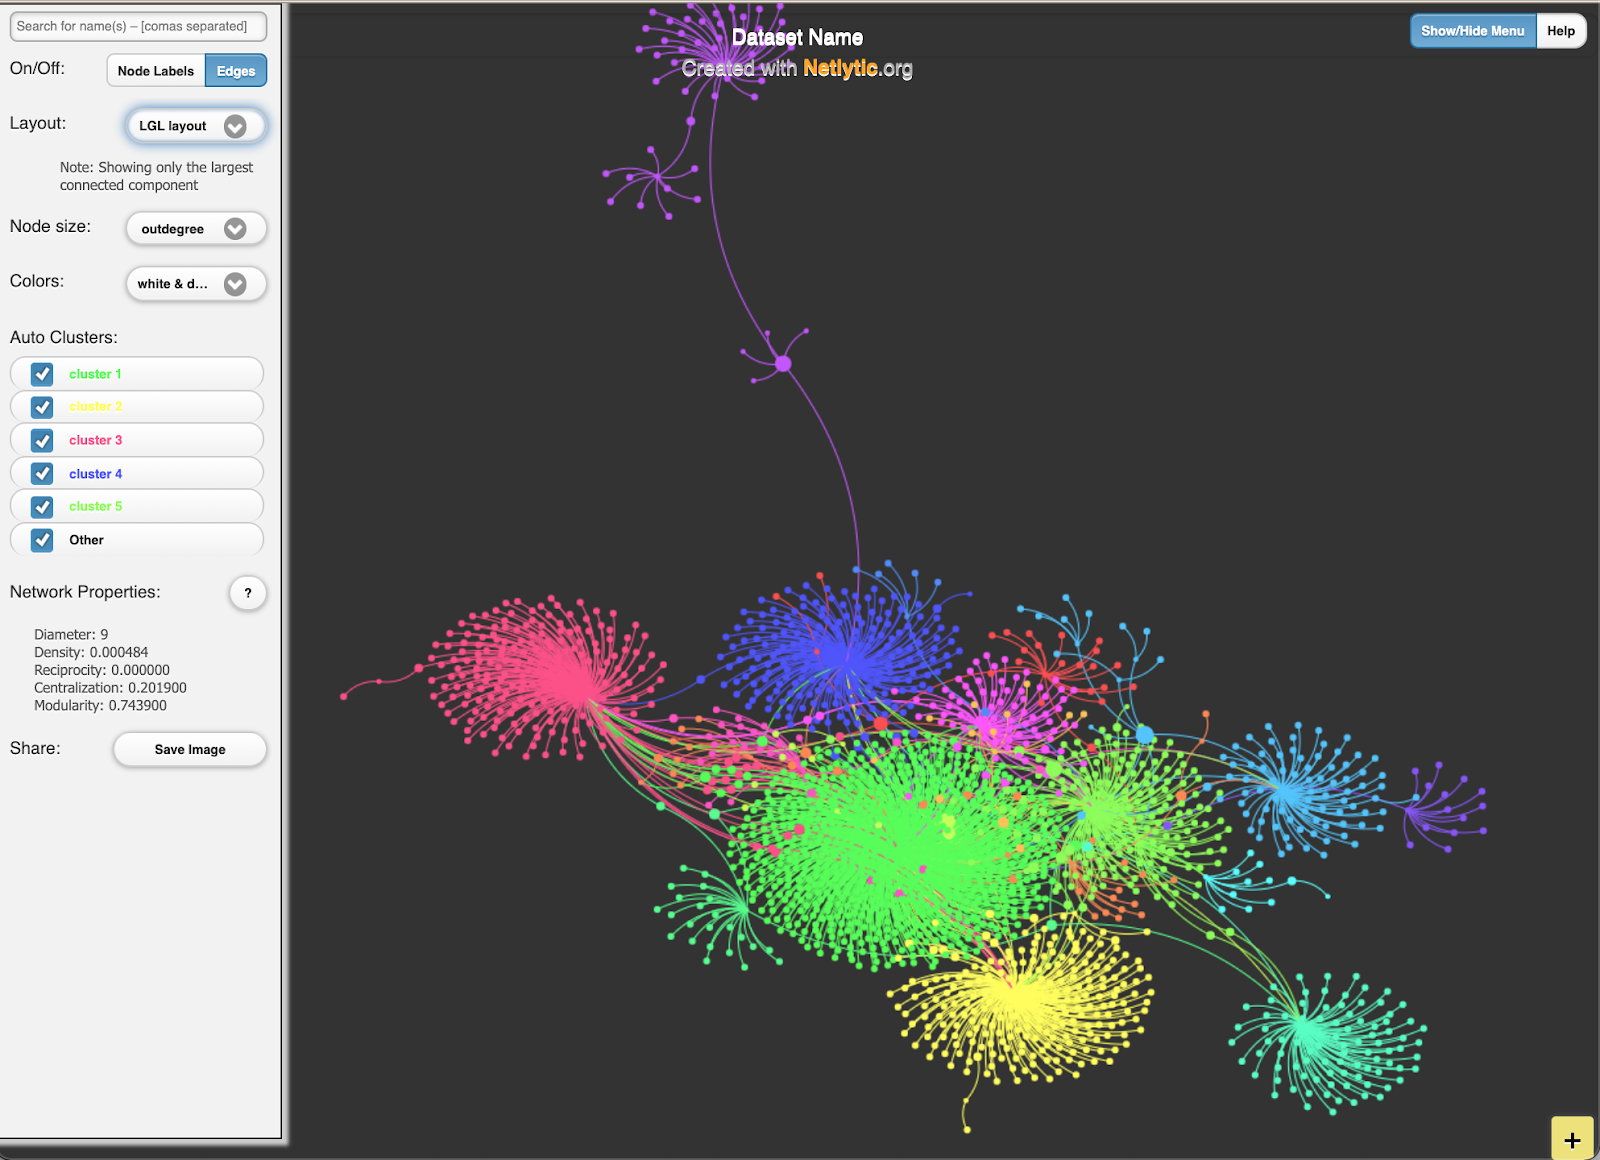 Communities formed in a graph produced with a dataset of tweets